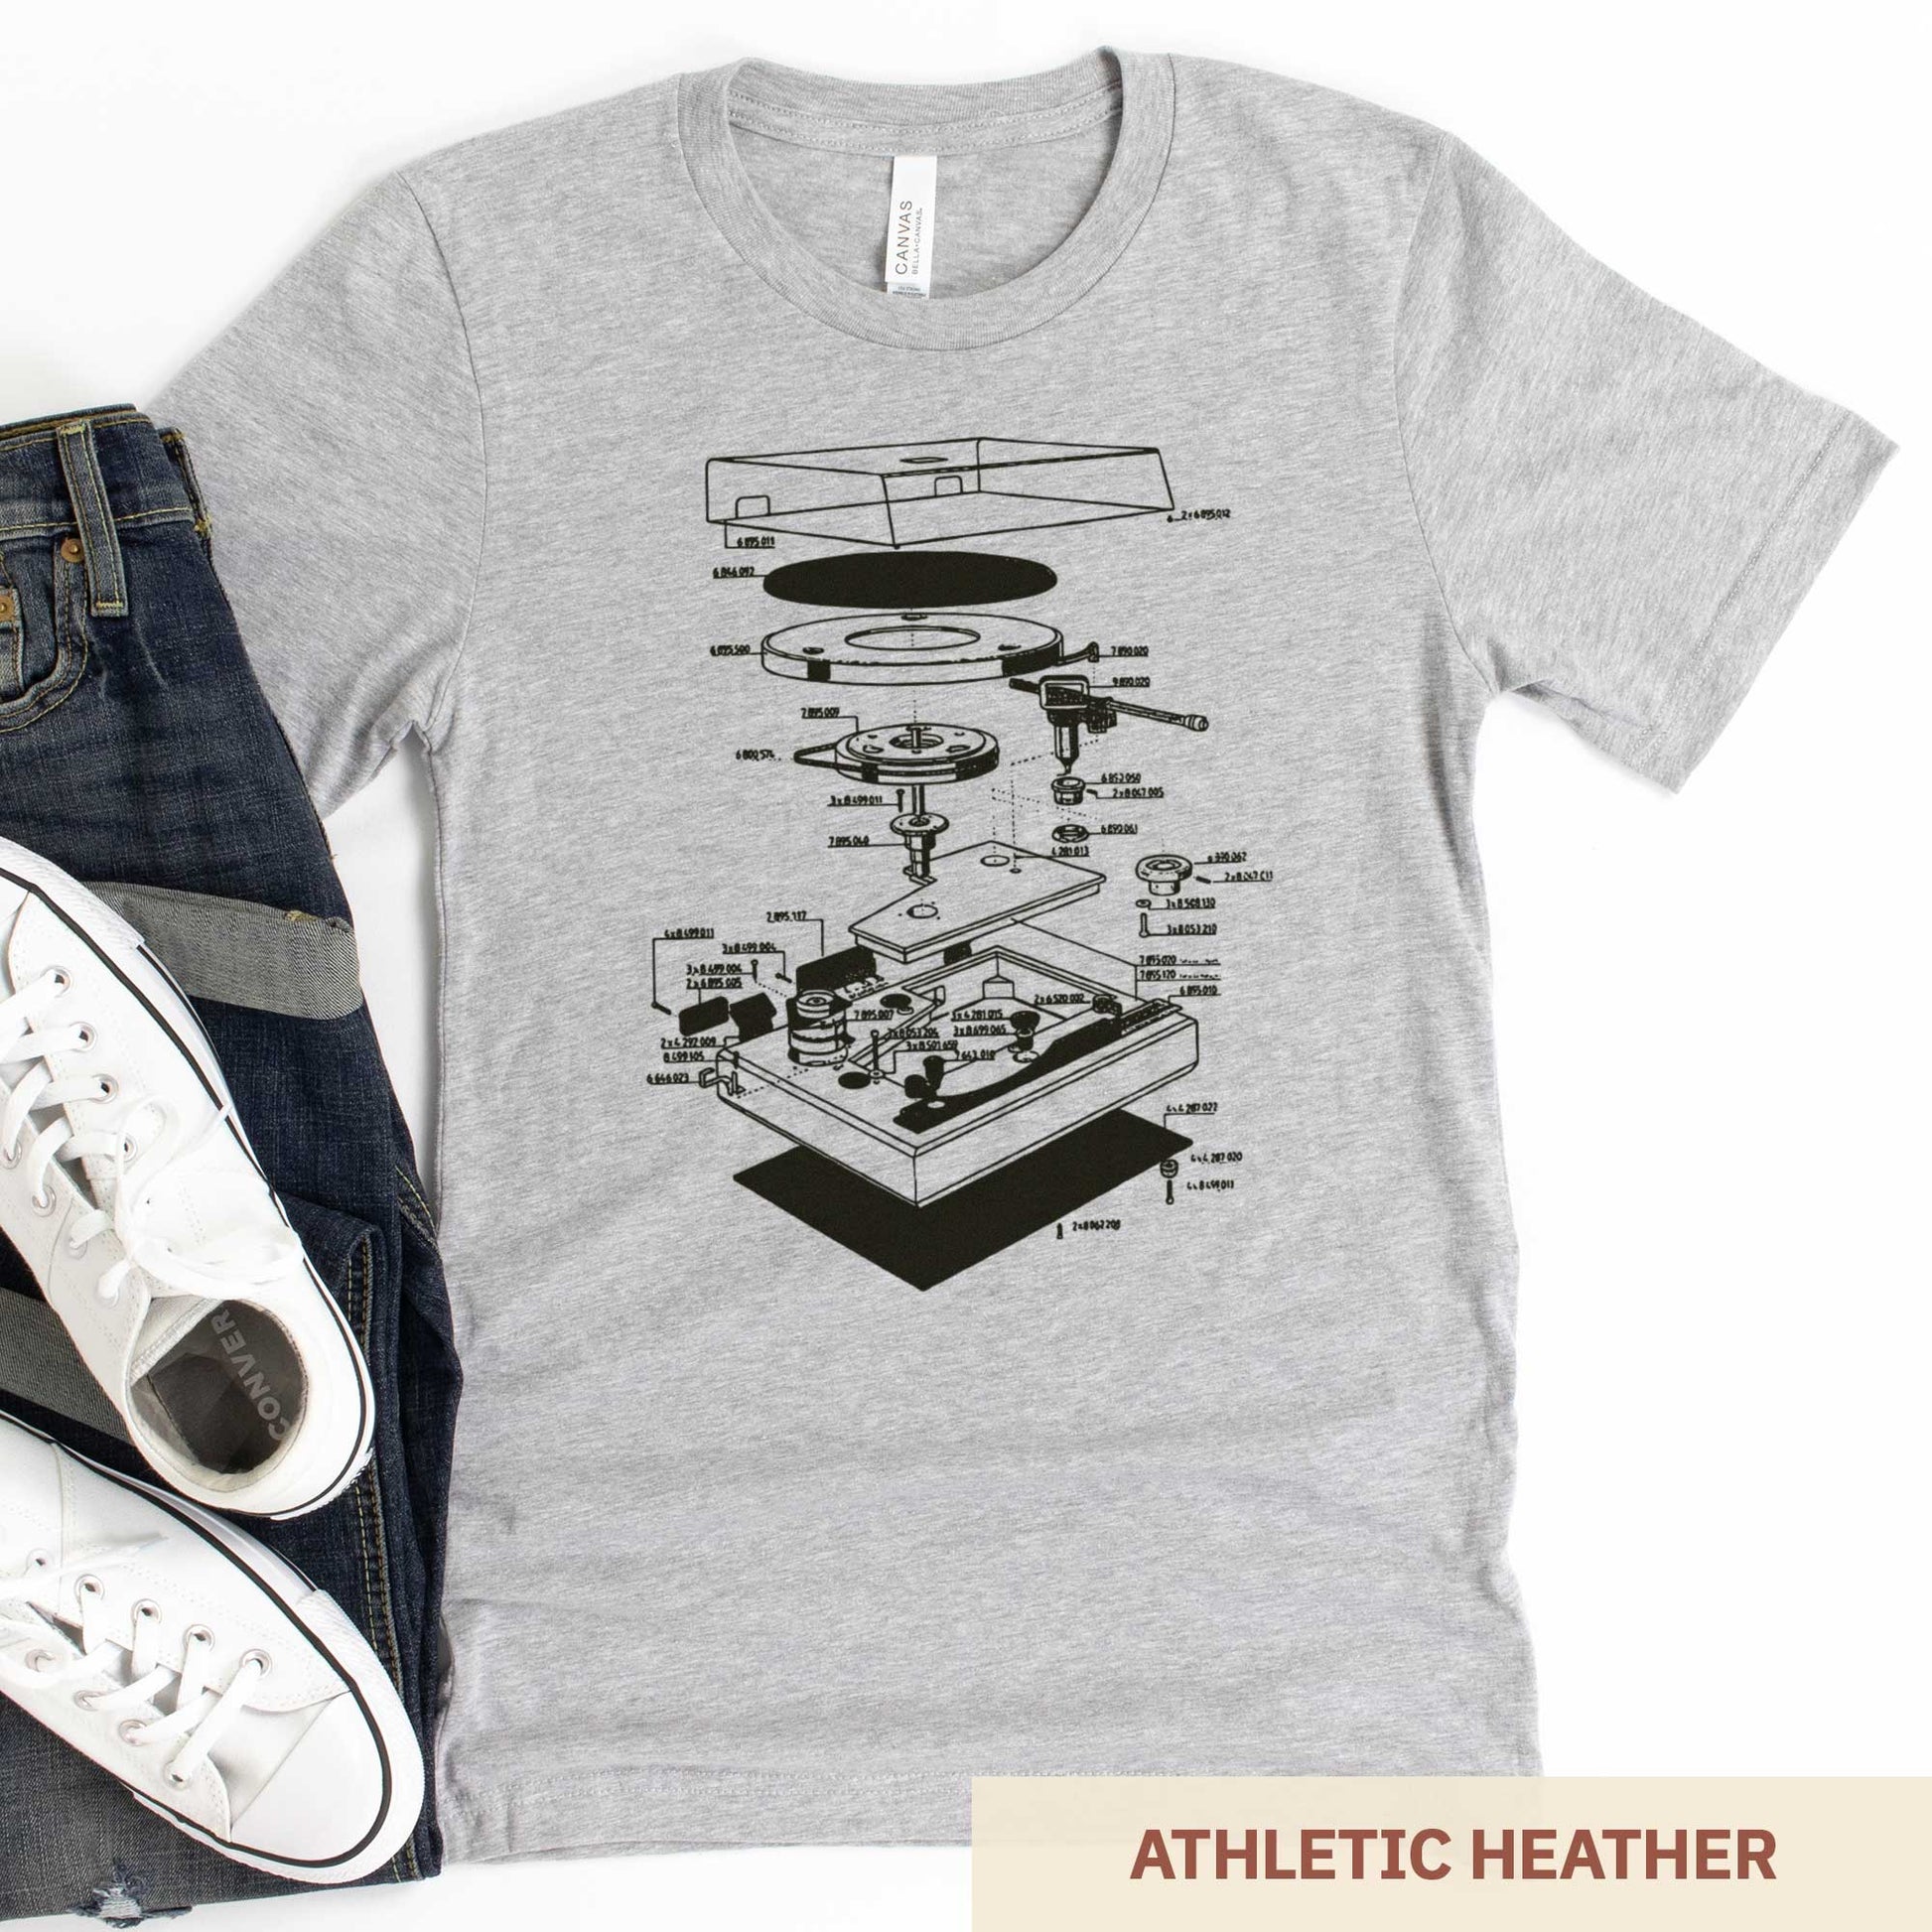 An athletic heather Bella Canvas t-shirt featuring an exploded view diagram of a turntable record player.